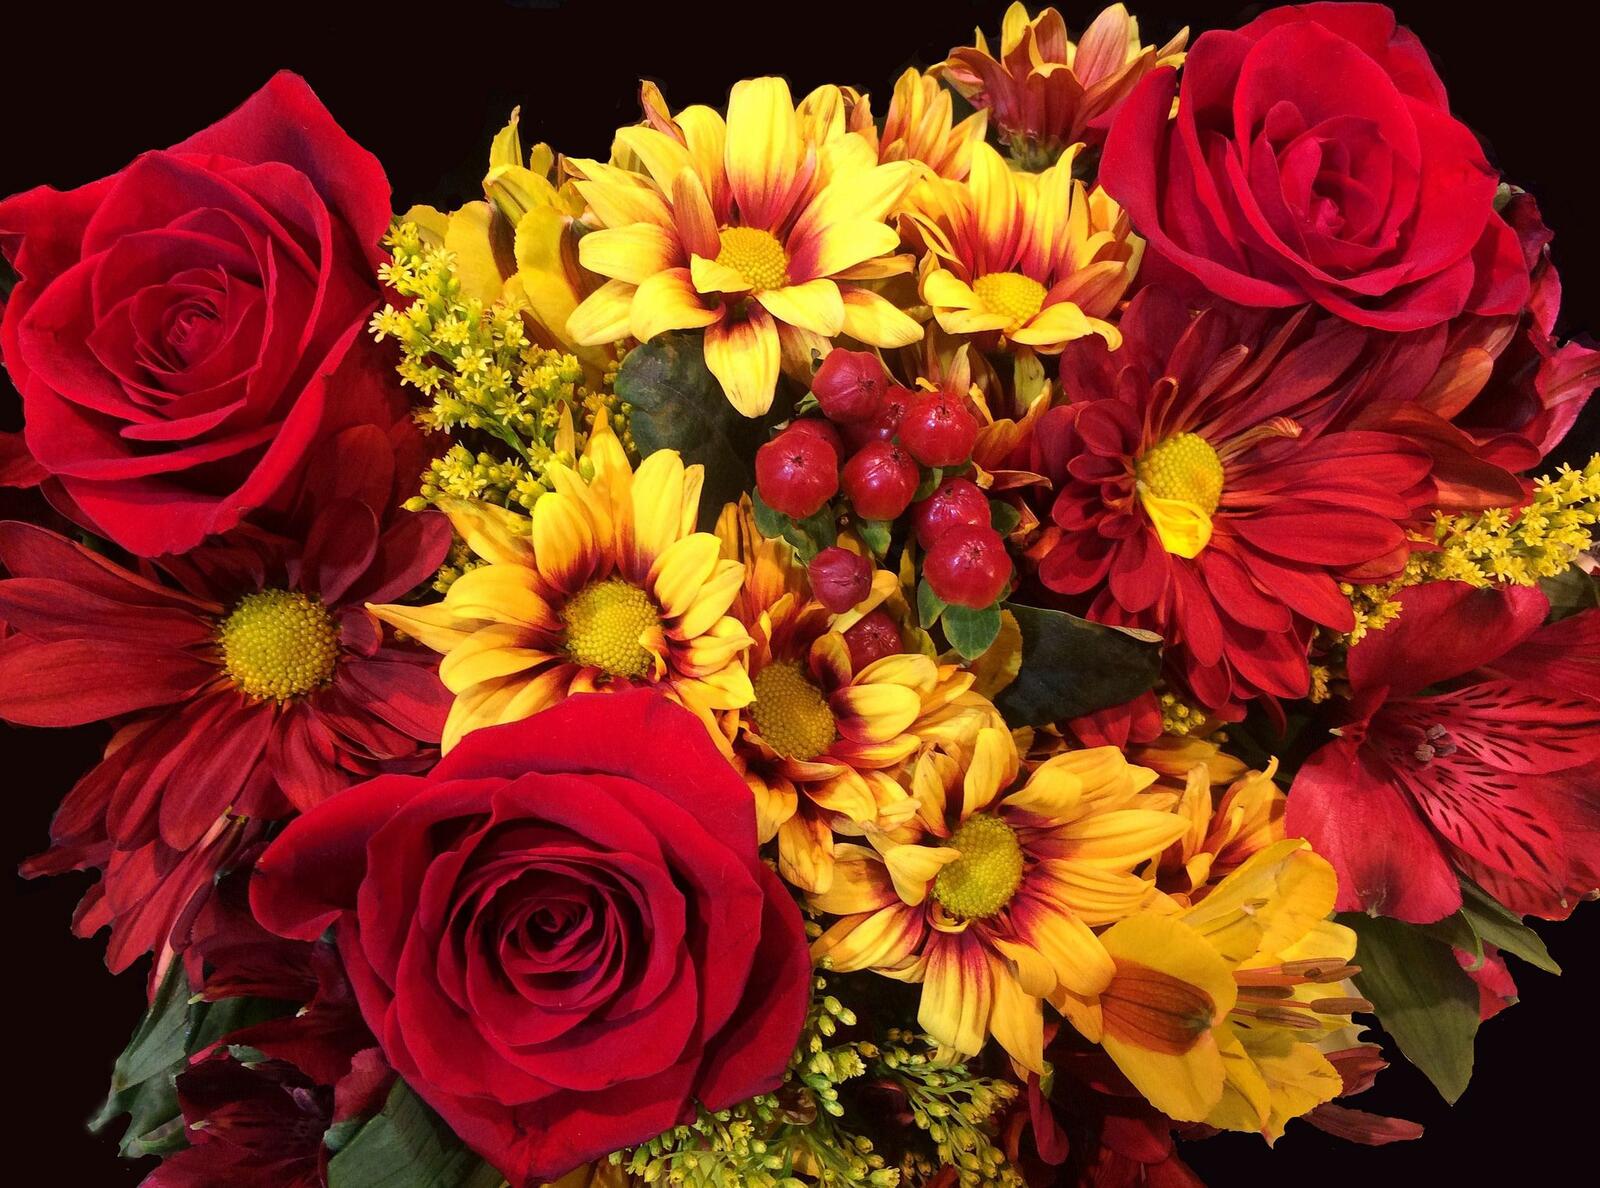 Wallpapers red roses yellow flowers flora on the desktop